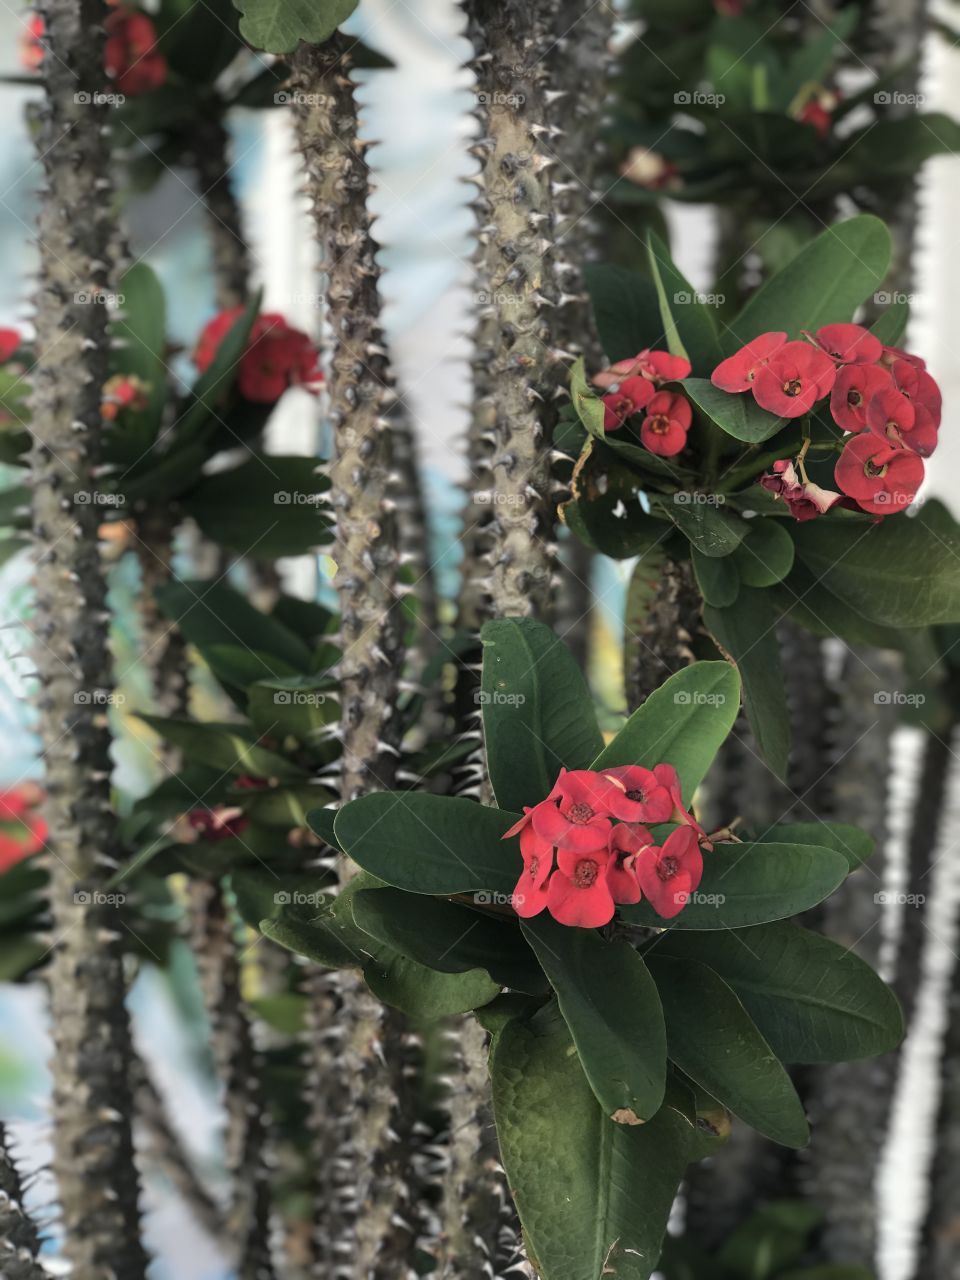 I took these photos while on a cruise. I fond this particular plant while in KeyWest, FL. I took these photos with an iPhone 7 Plus. Also, no filter! Side note.. if you know the name of this planet let me know! Thanks ❤️